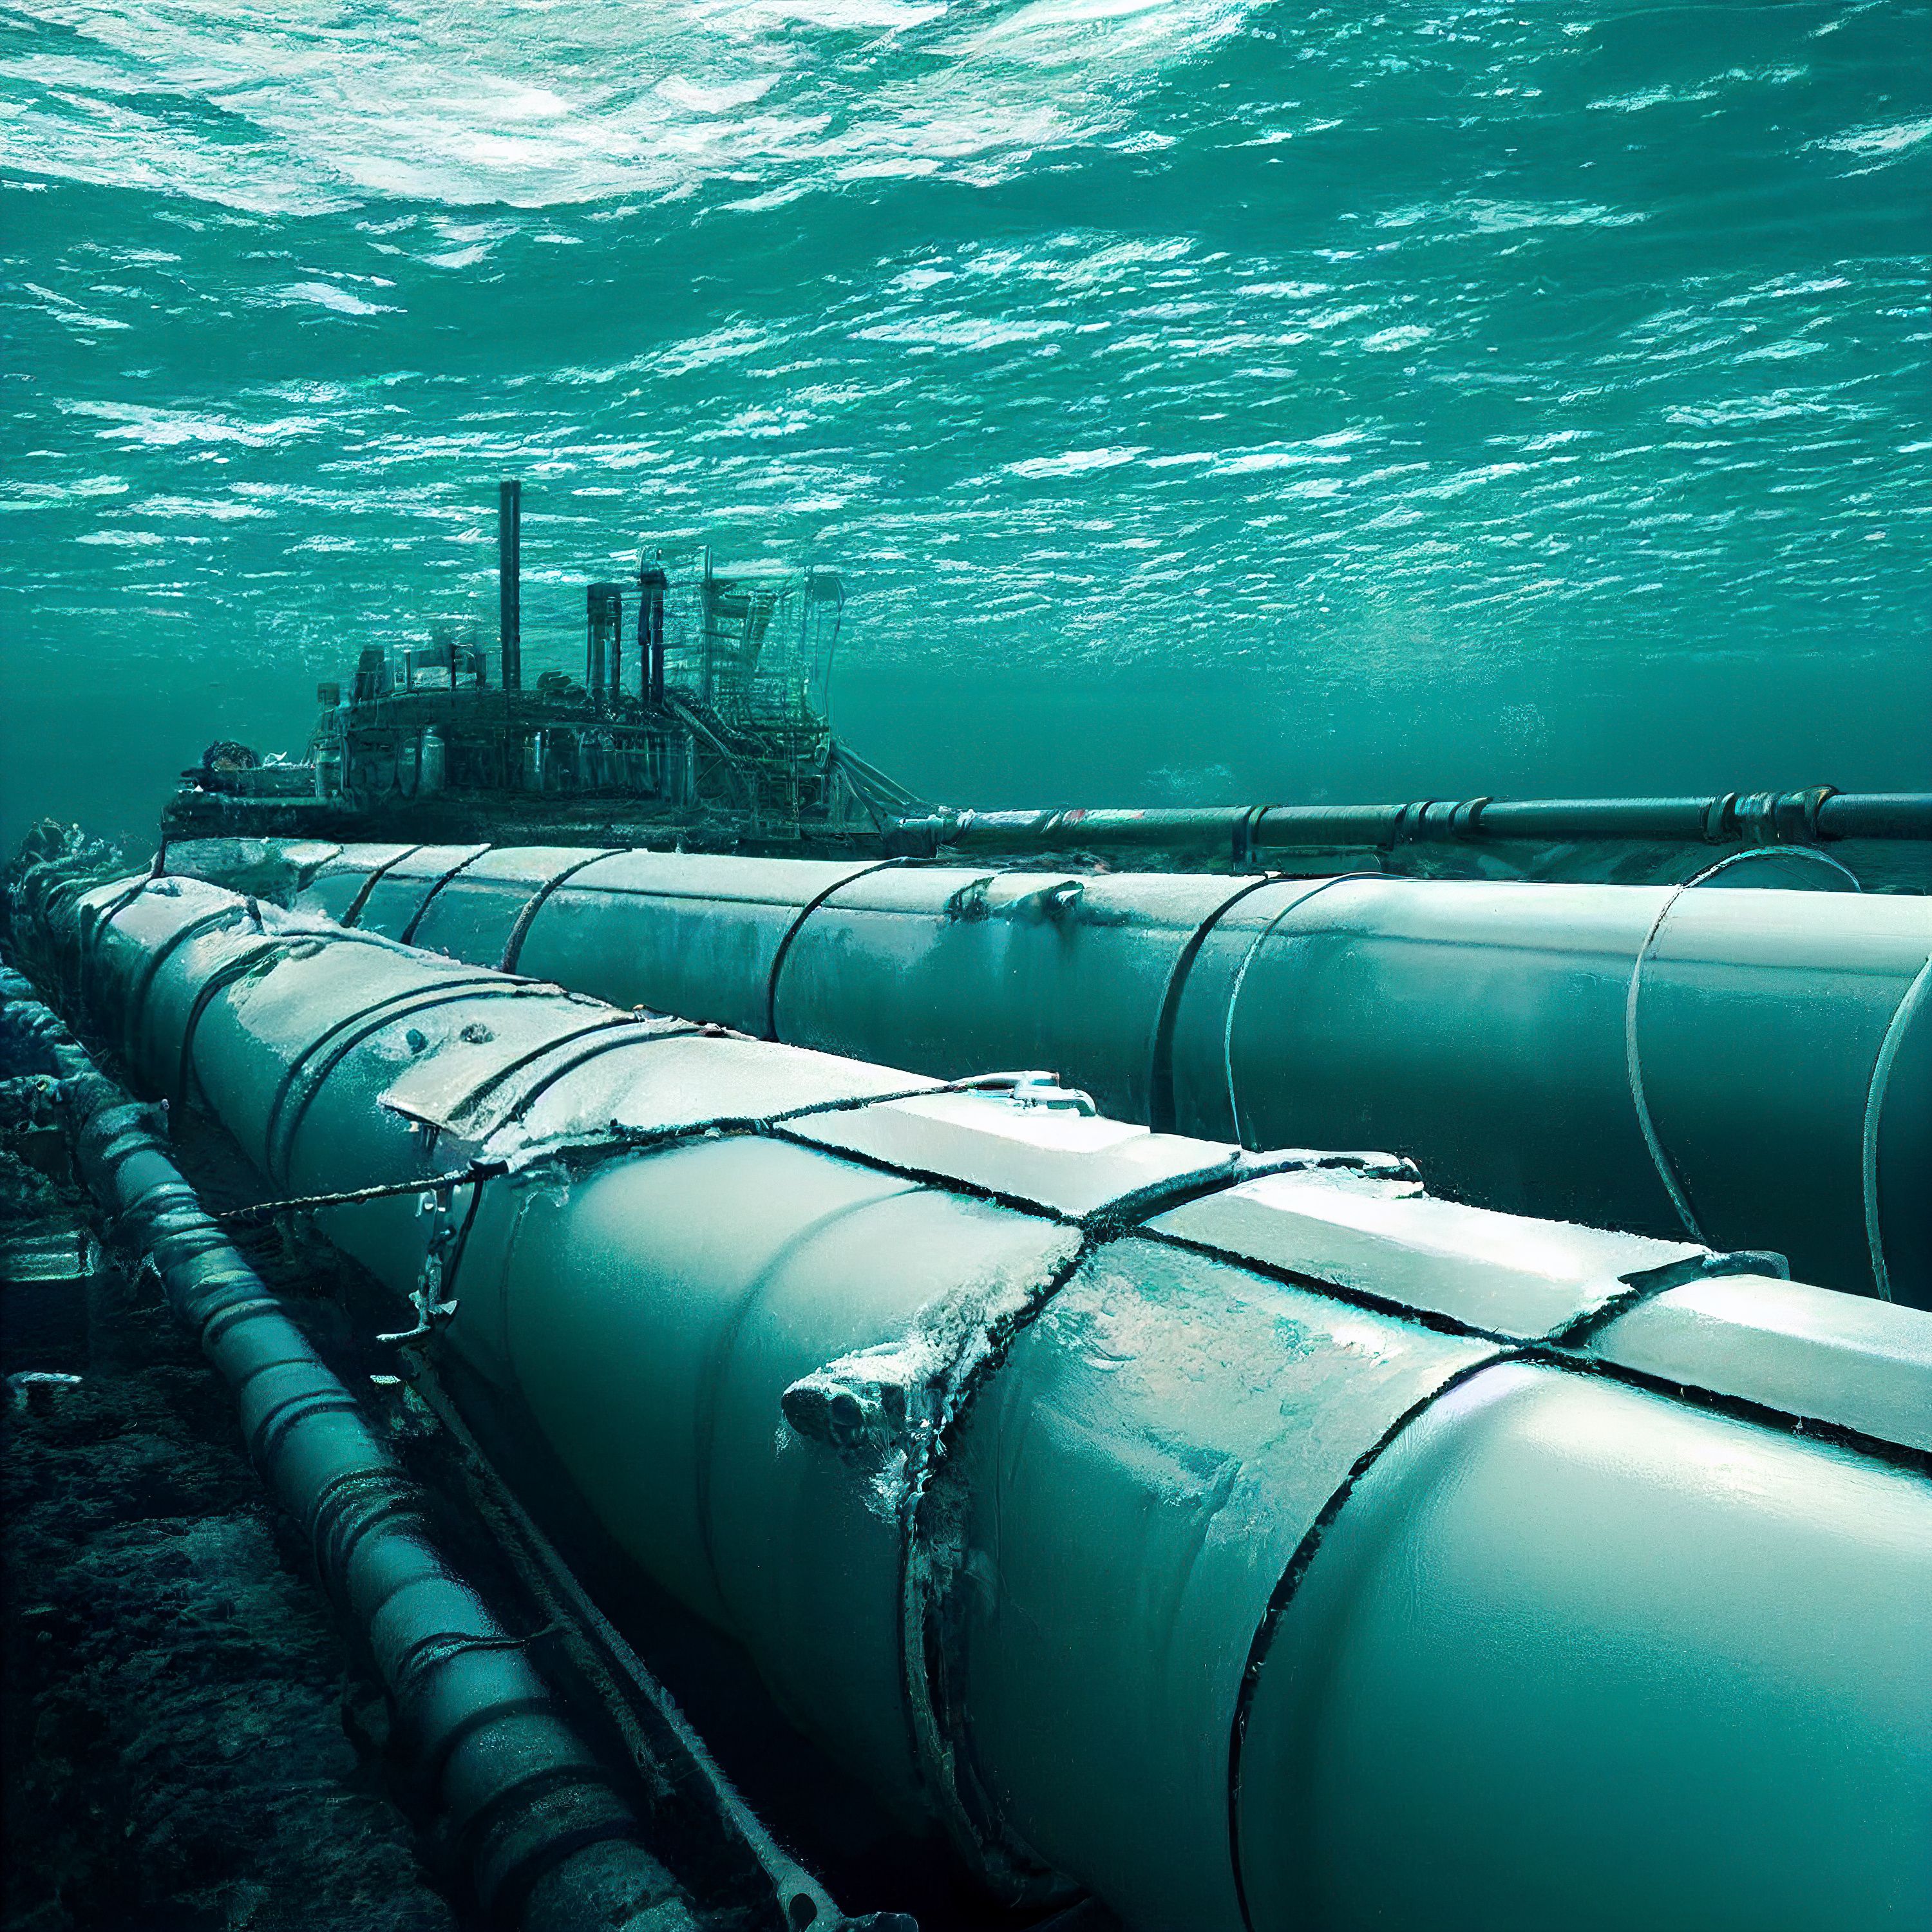 An image of gas pipelines underwater. 